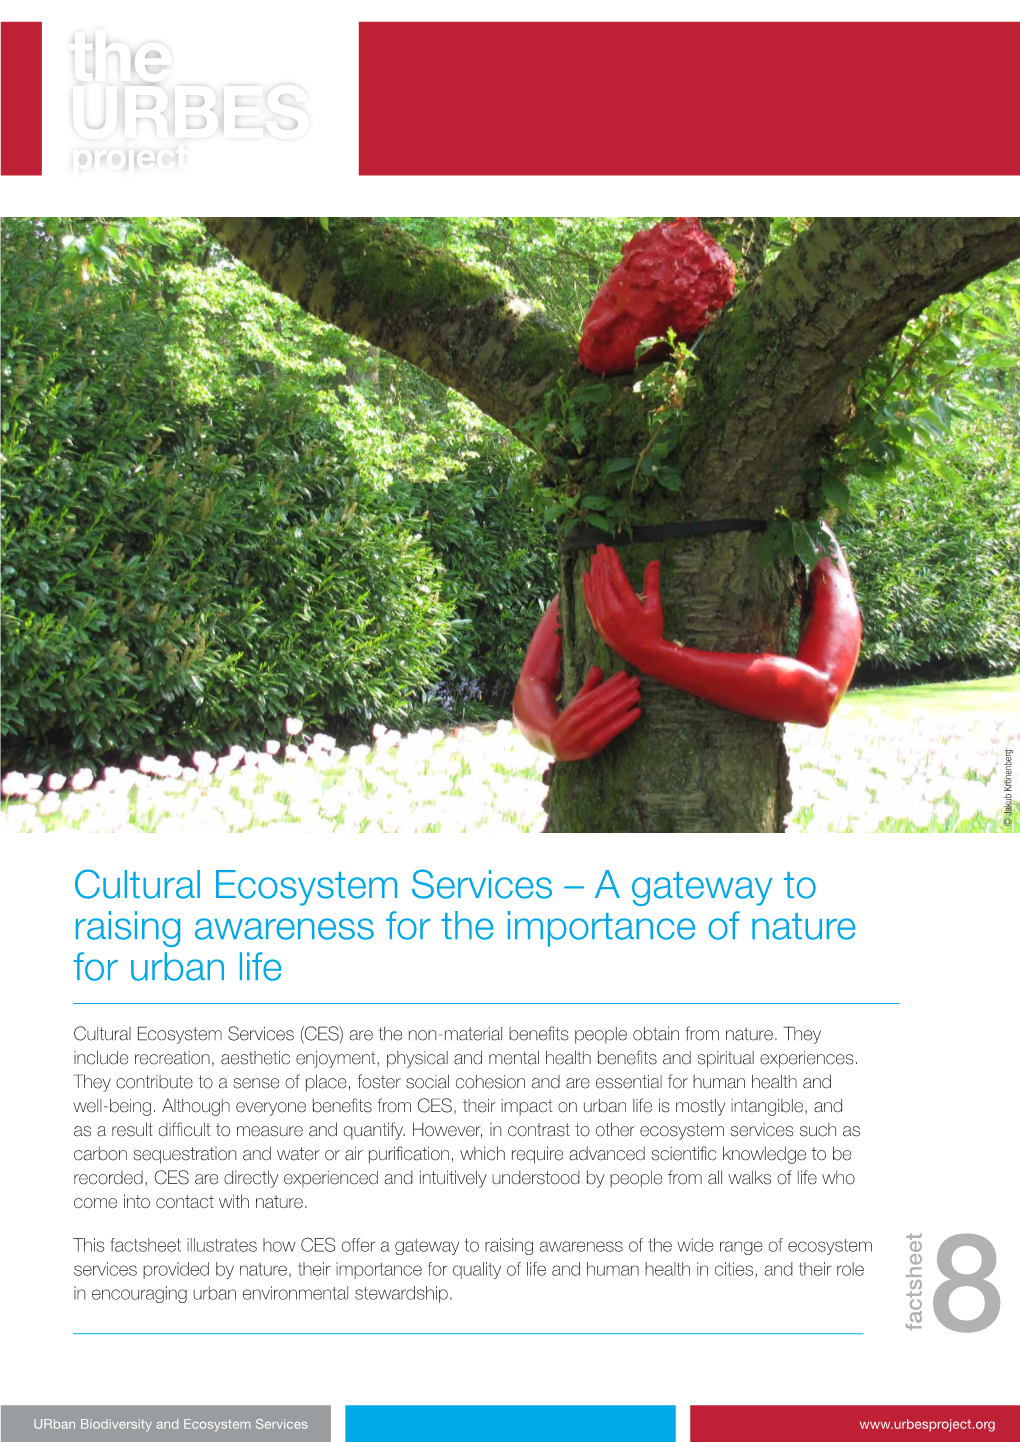 Cultural Ecosystem Services – a Gateway to Raising Awareness for the Importance of Nature for Urban Life